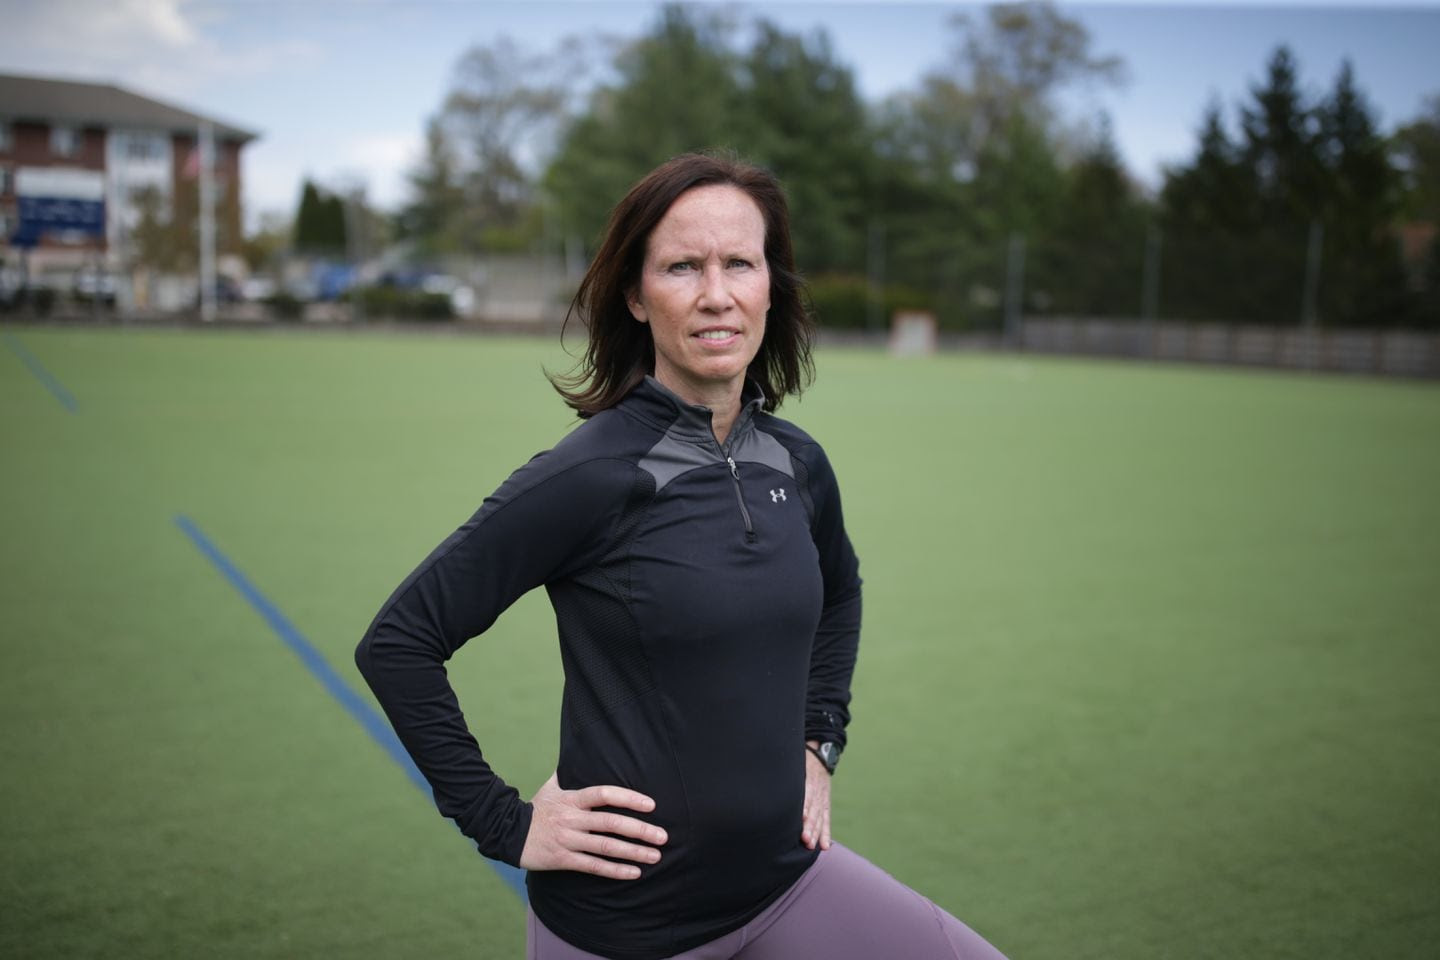 Alison Foley, the winningest coach in the history of Boston College women’s soccer, became troubled by the sharp rise in recruiting middle school girls through “verbal commitments.”